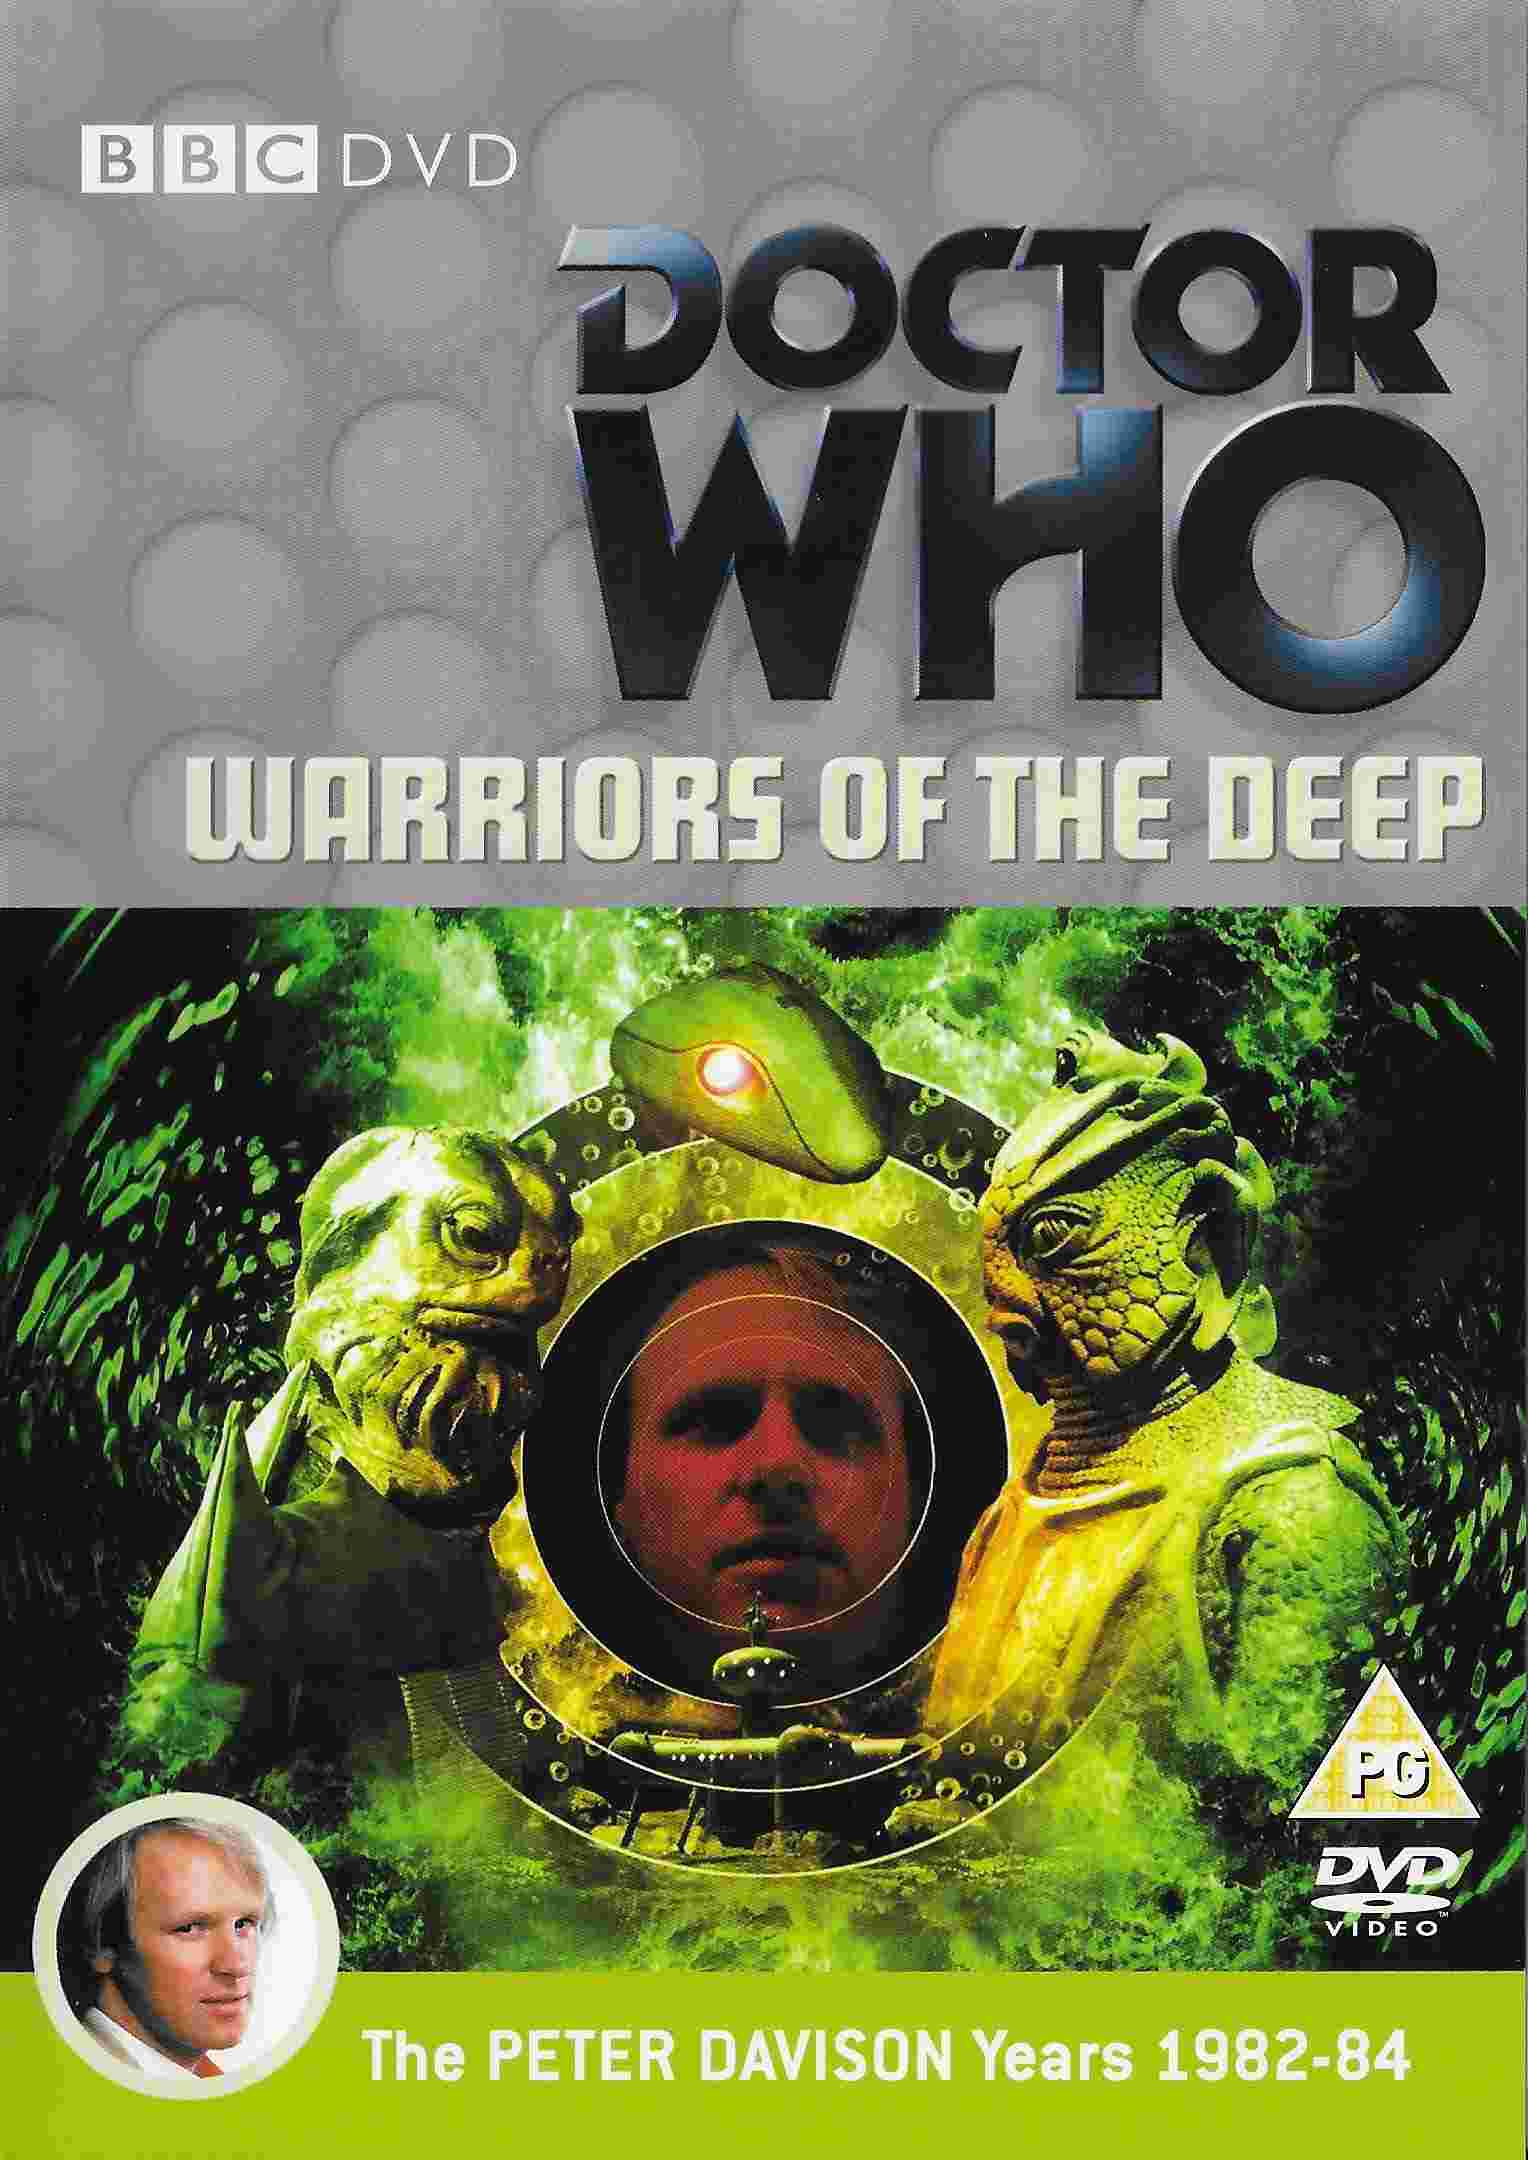 Picture of BBCDVD 2438C Doctor Who - Warriors of the deep by artist Johnny Byrne from the BBC dvds - Records and Tapes library